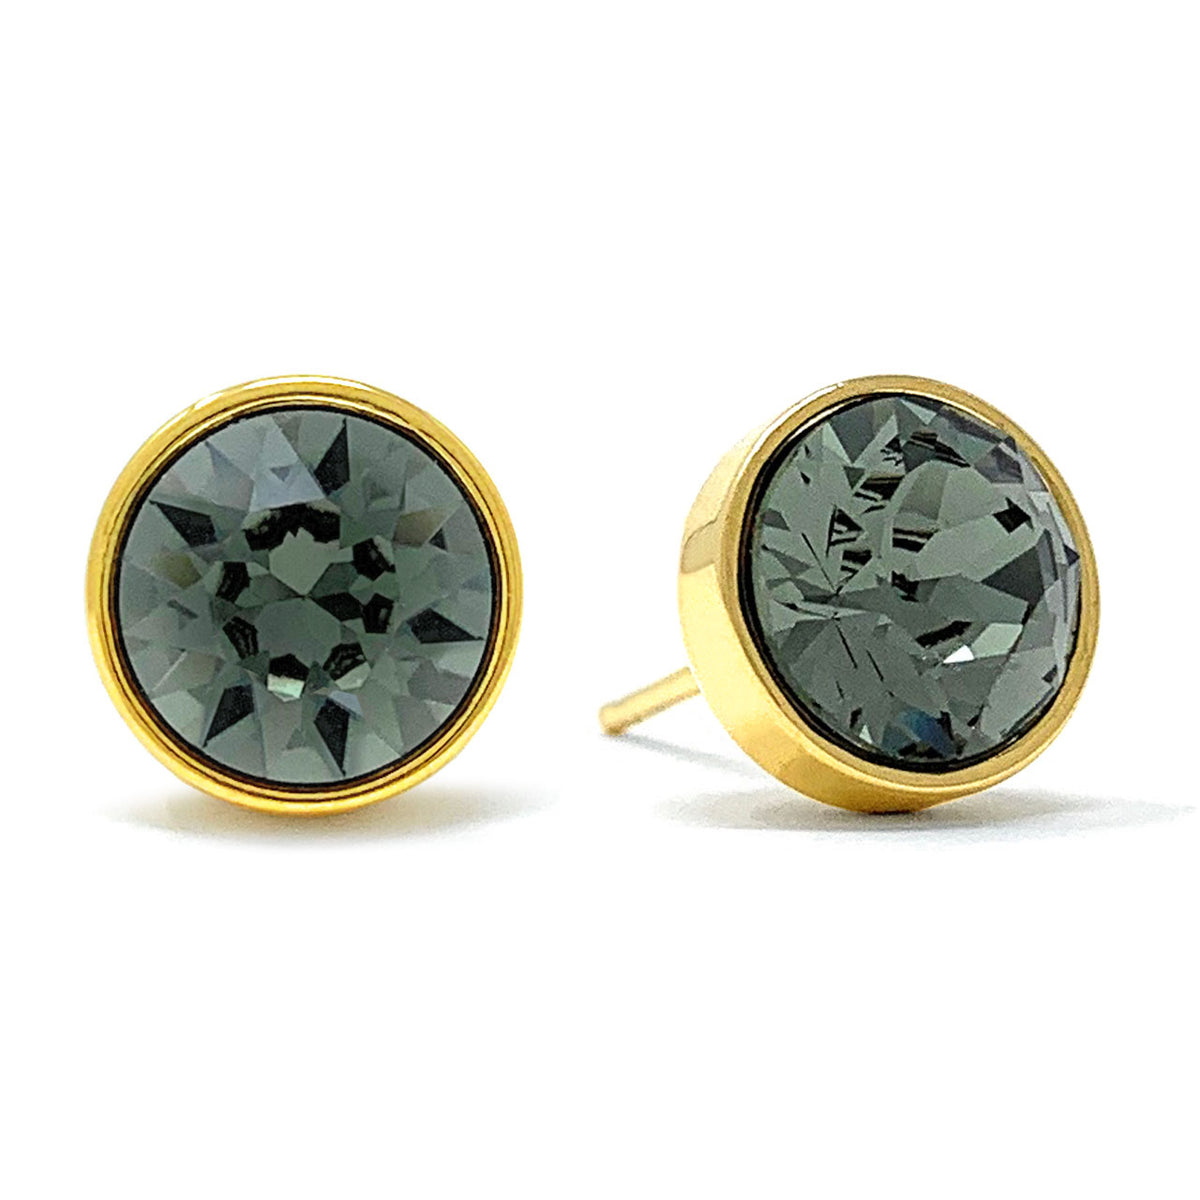 Harley Stud Earrings with Black Diamond Round Crystals from Swarovski Gold Plated - Ed Heart